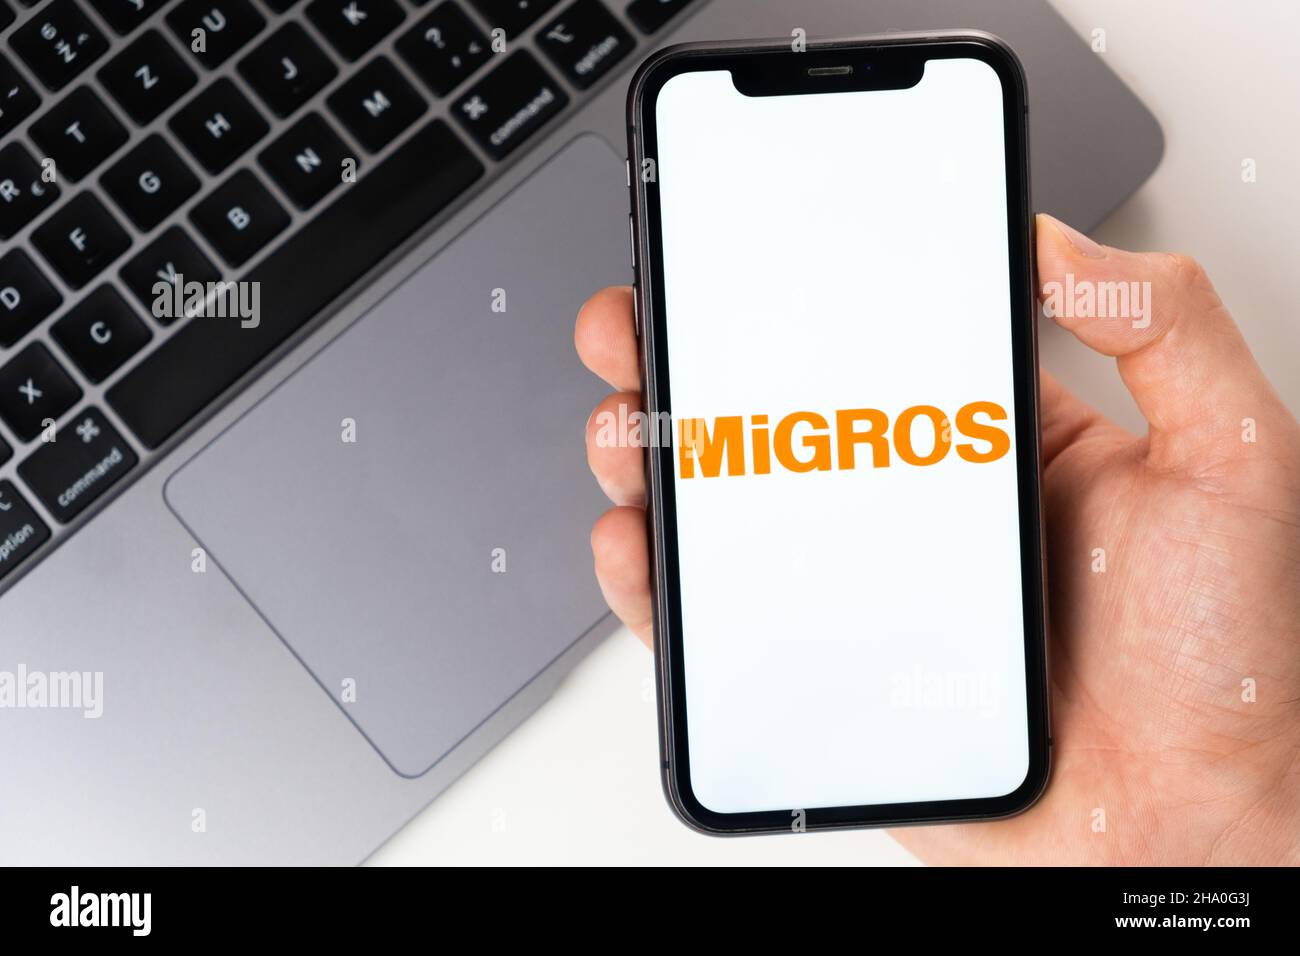 MiGROS mobile application on the smartphone screen. A mobile phone in a man hand near an open laptop. White background. November 2021, San Francisco, USA Stock Photo